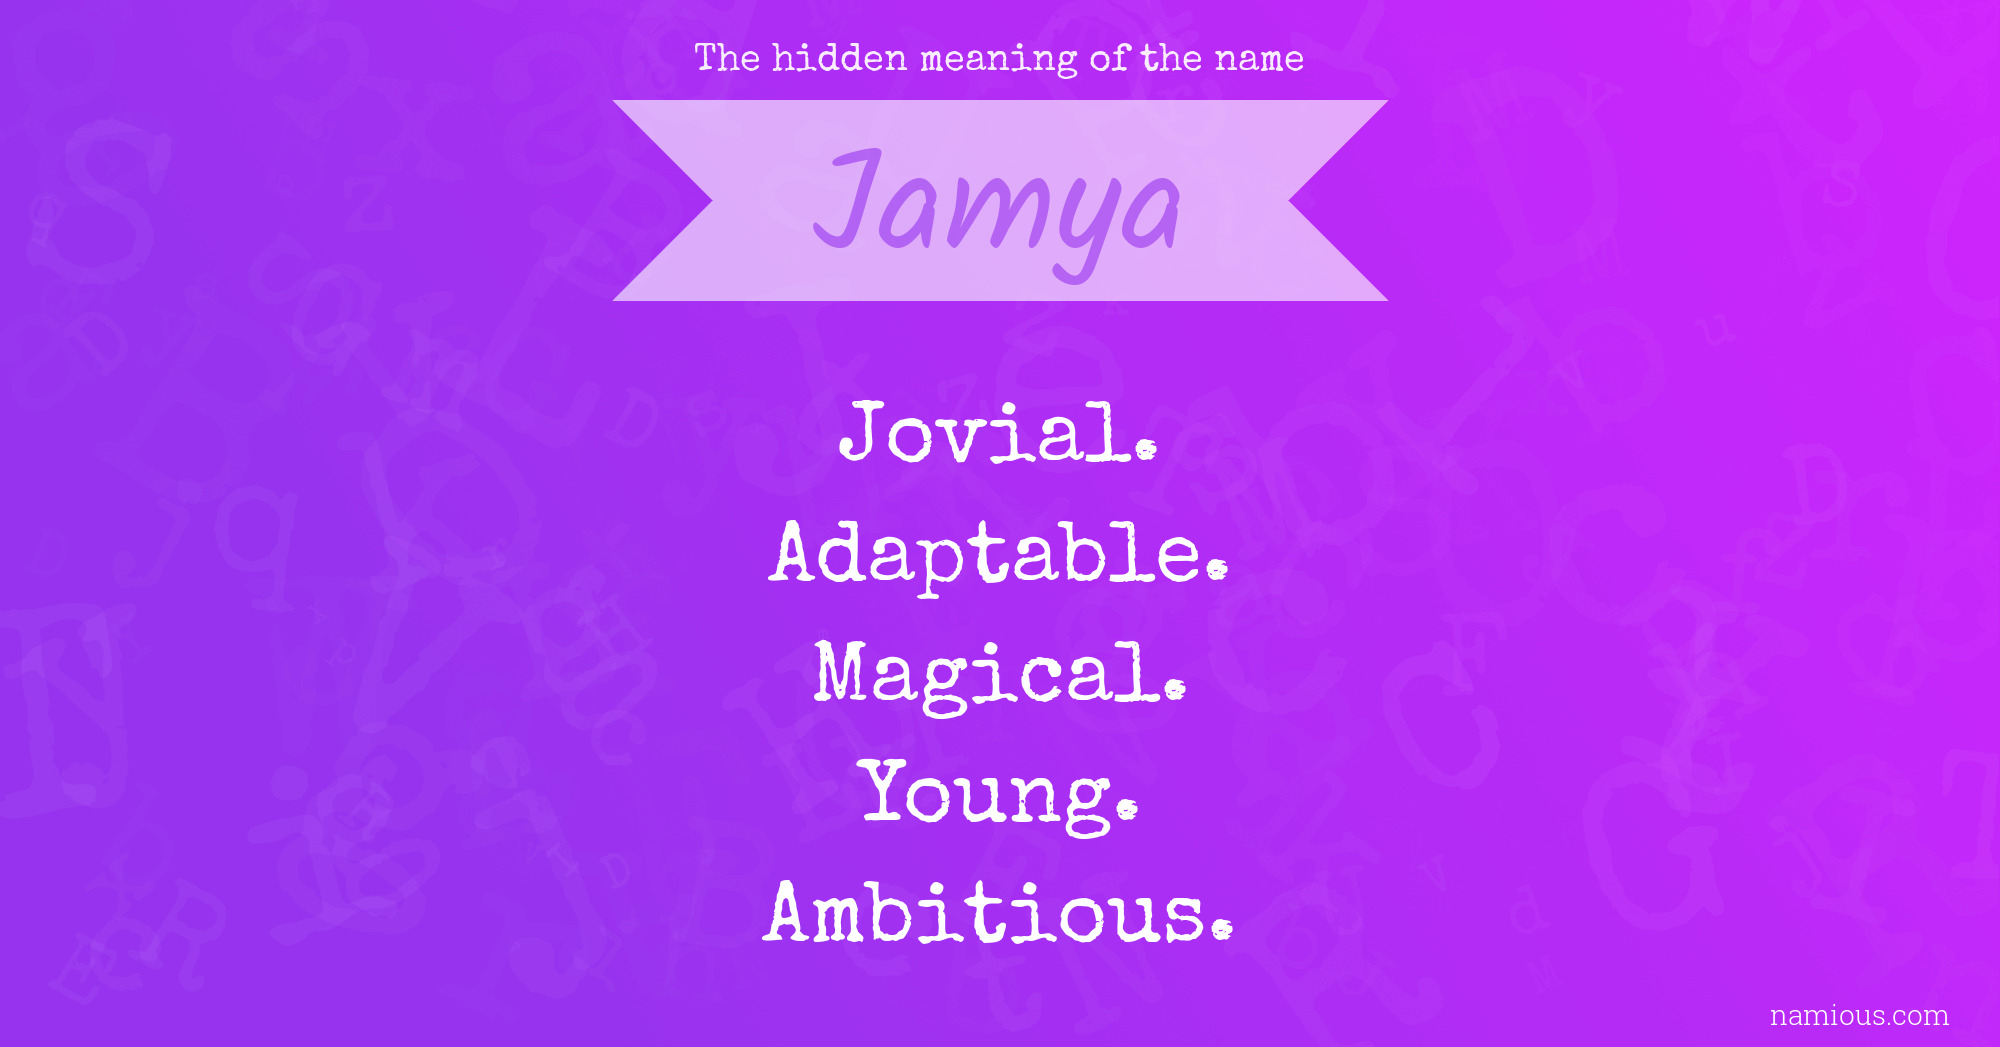 The hidden meaning of the name Jamya